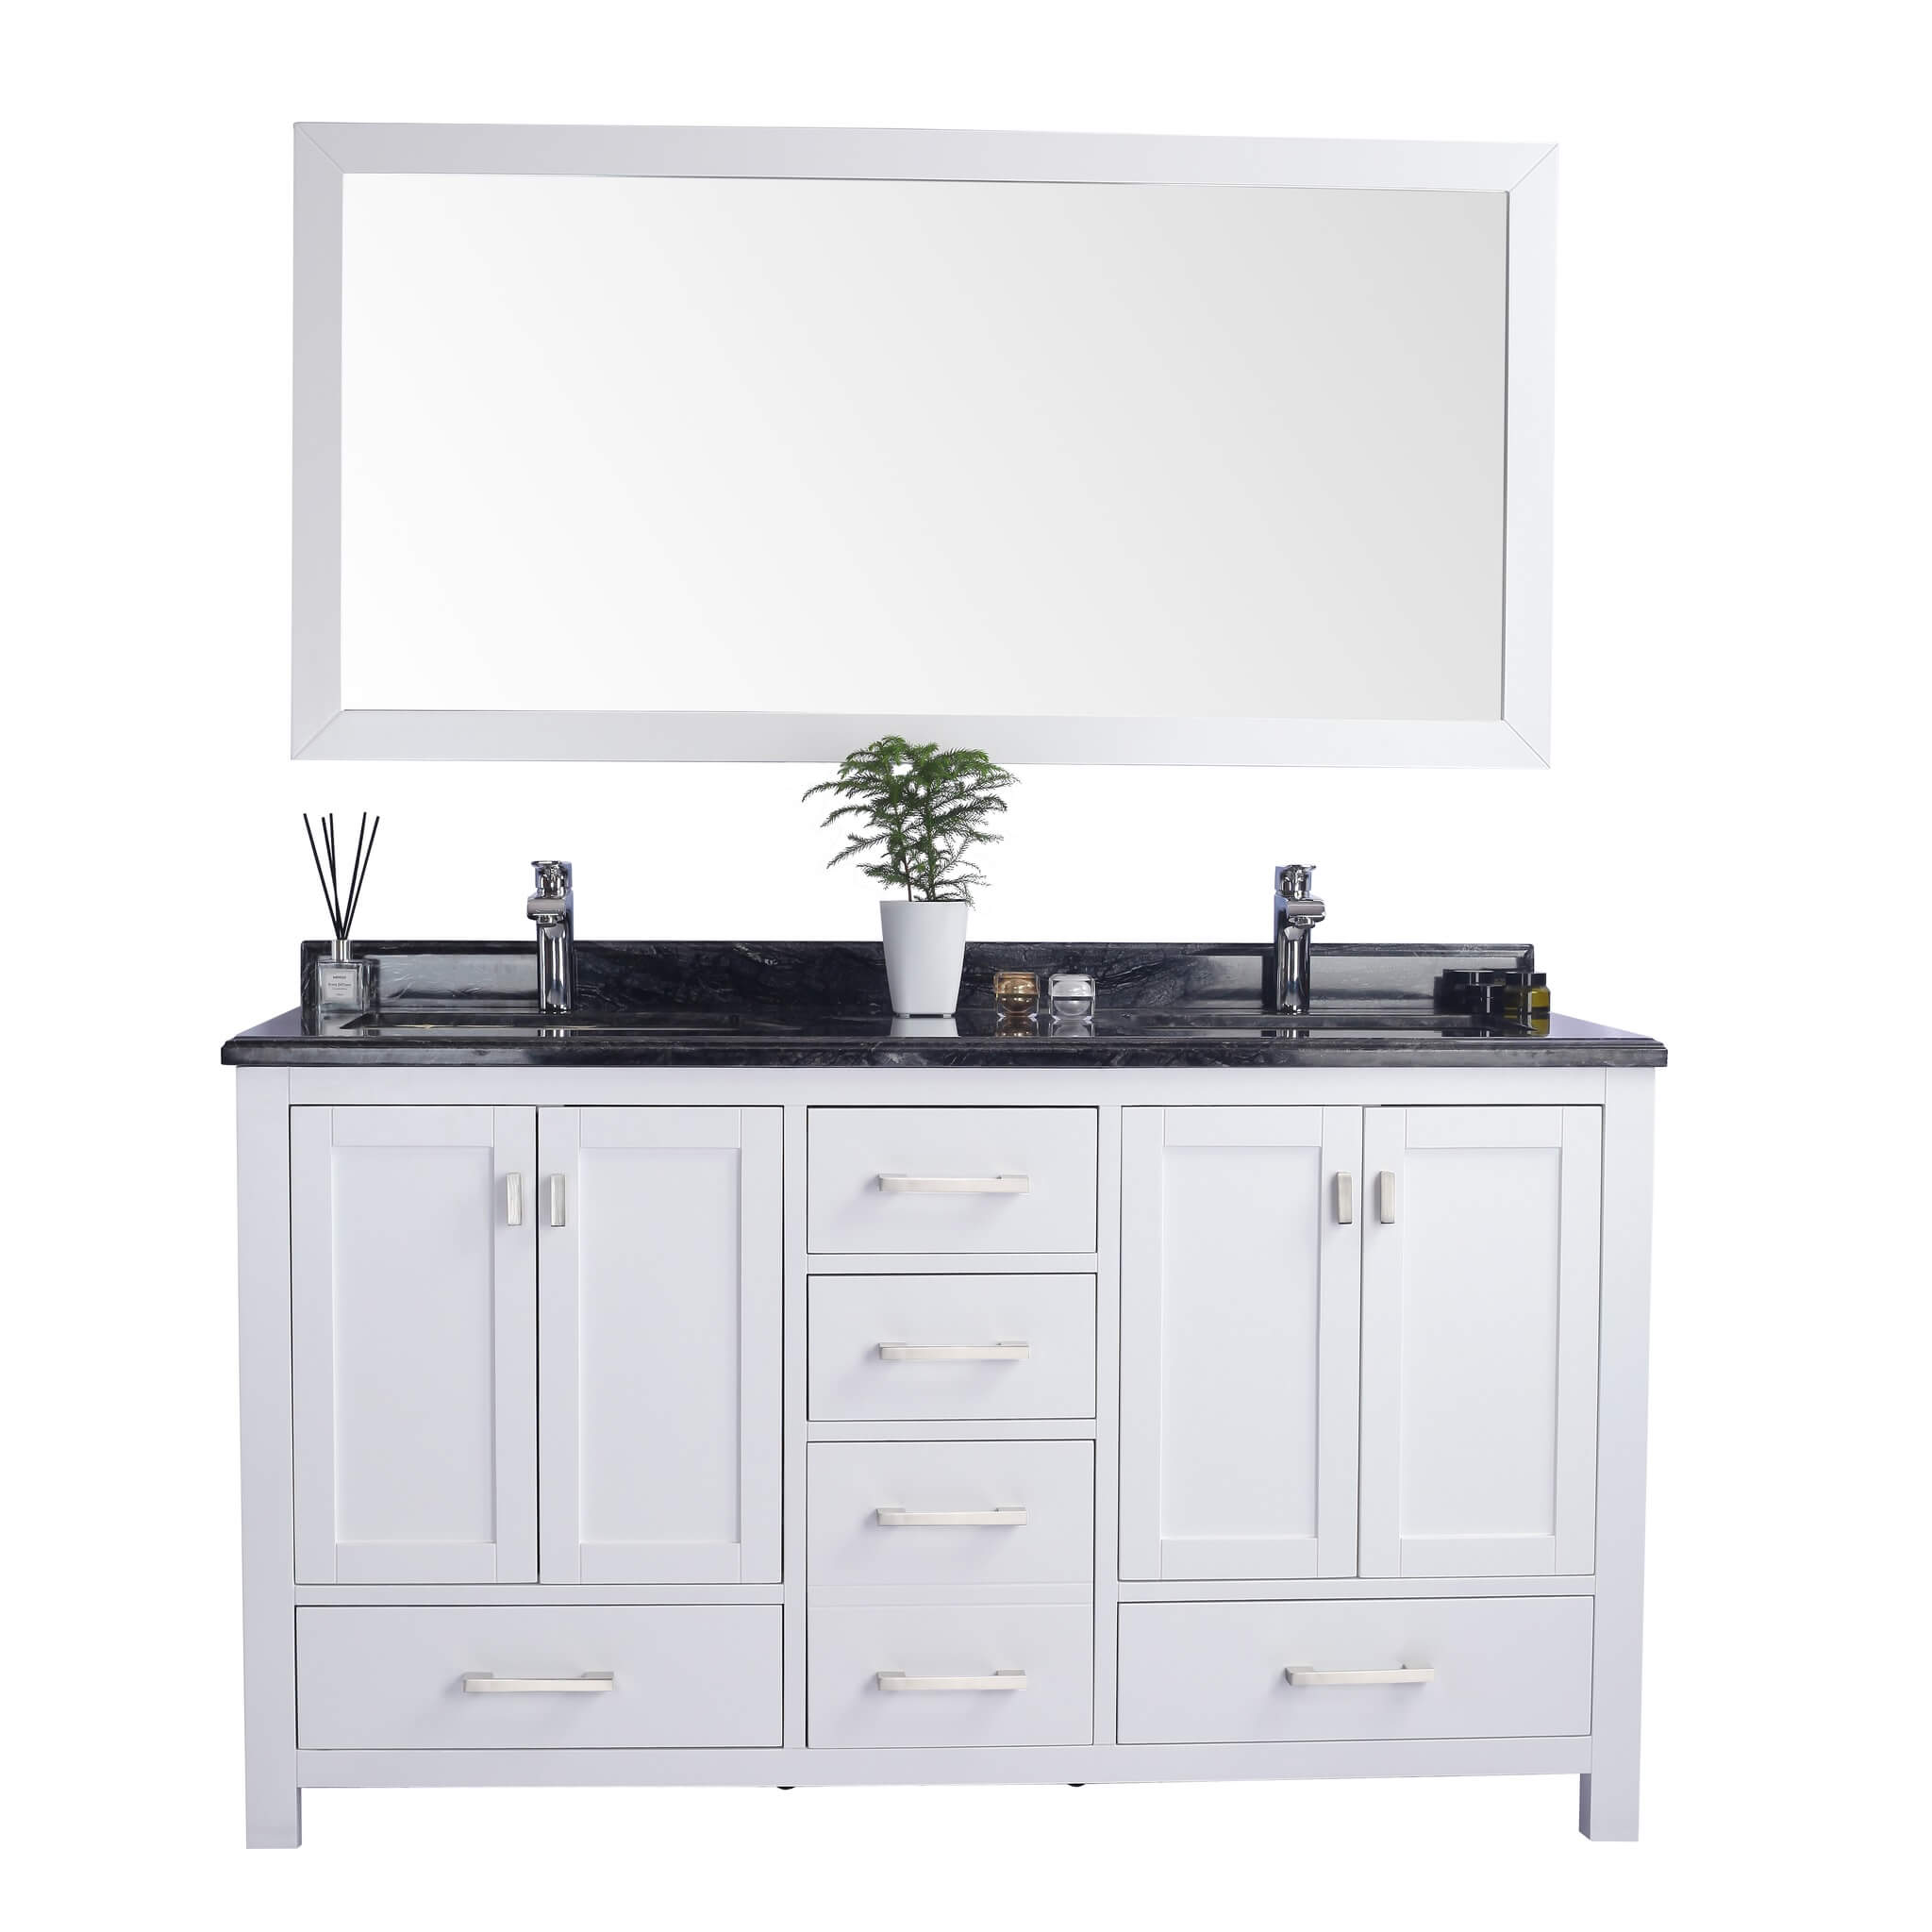 LAVIVA Wilson 313ANG-60W-BW 60" Double Bathroom Vanity in White with Black Wood Marble, White Rectangle Sinks, Front View